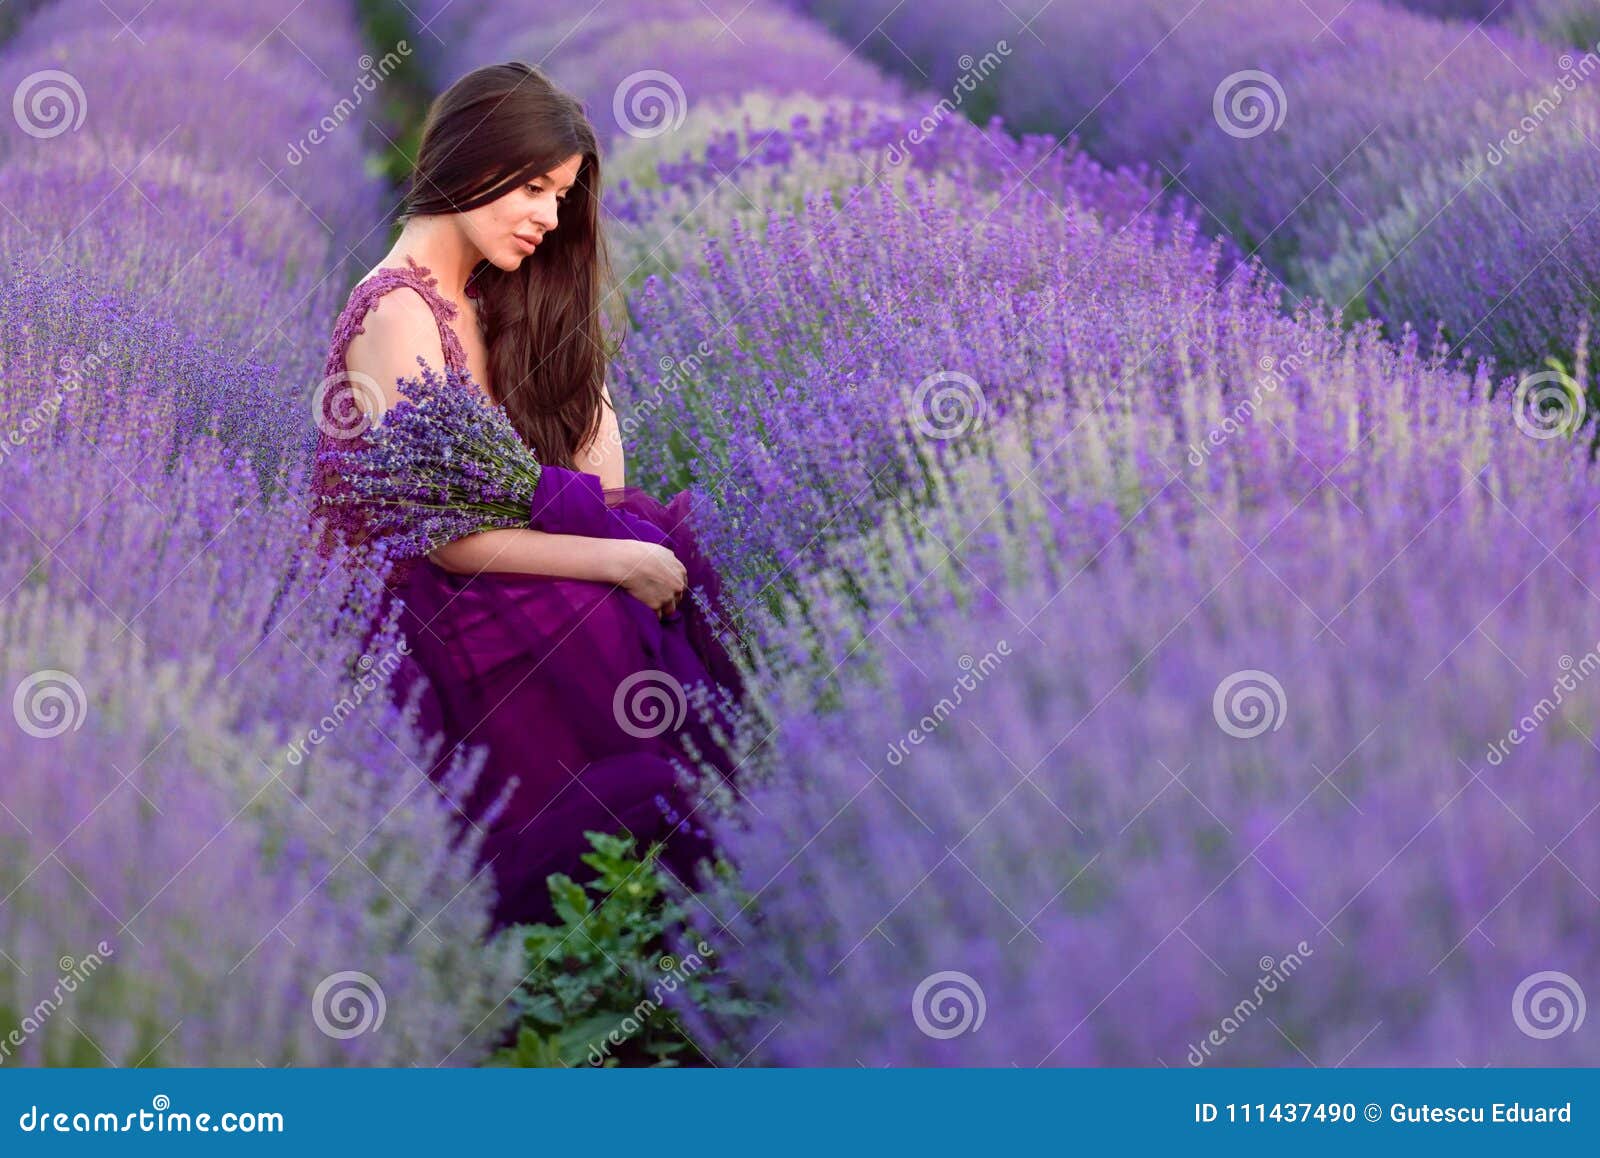 young beautiful woman in lavender fields with a romantic mood